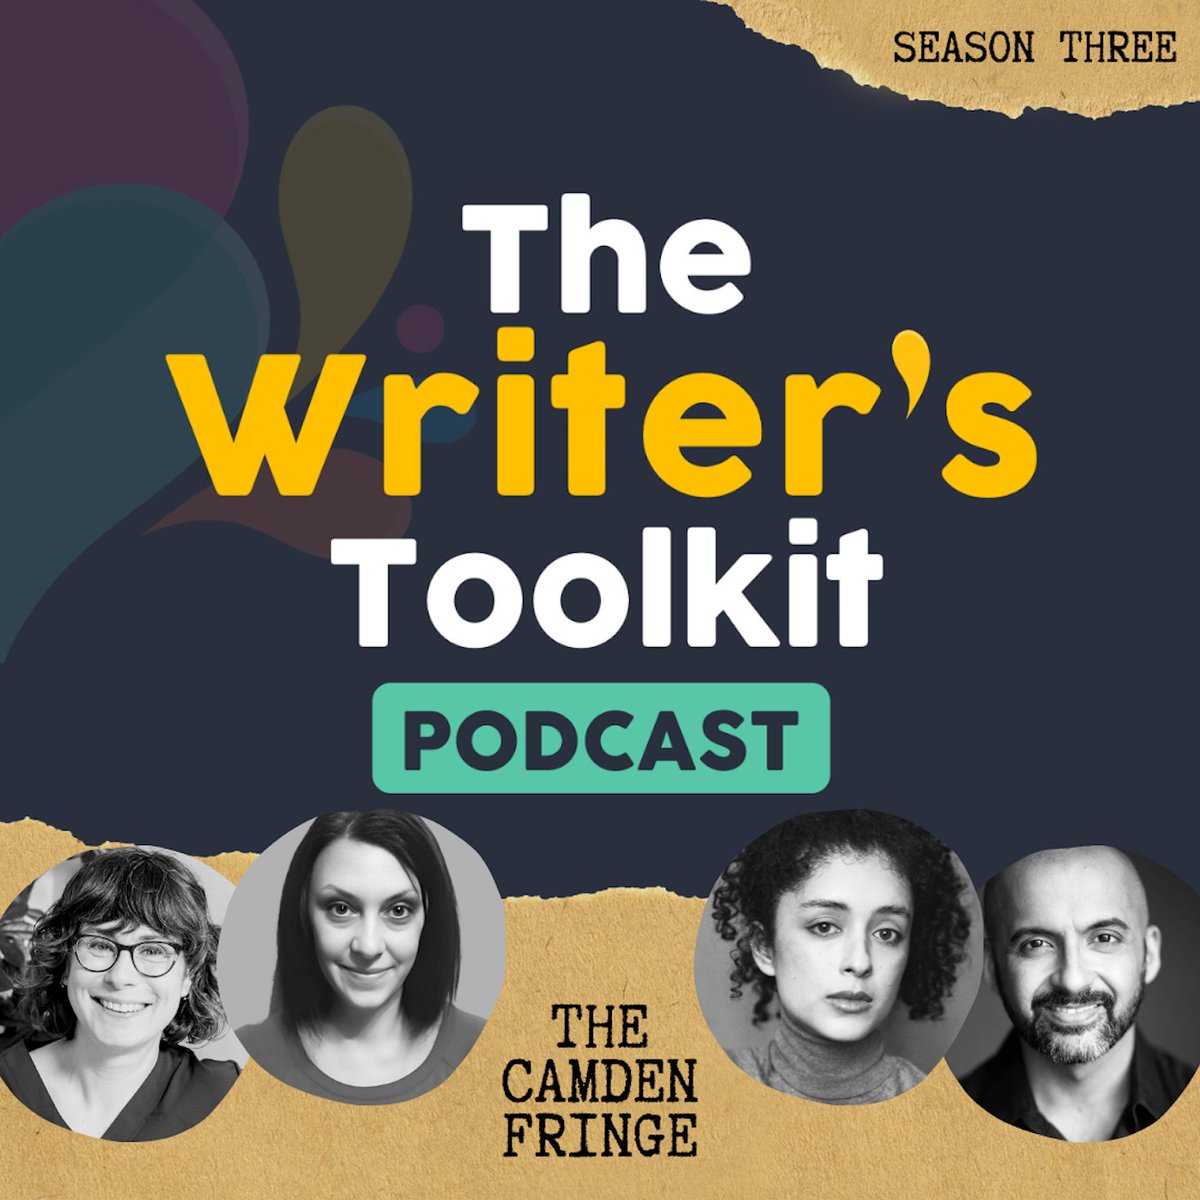 You can listen to a Camden Fringe themed episode of The Writers Toolkit Podcast by @PaulKalburgi. With chat from us, @Pavanjs and Valeria Suaste pod.link/1587874384